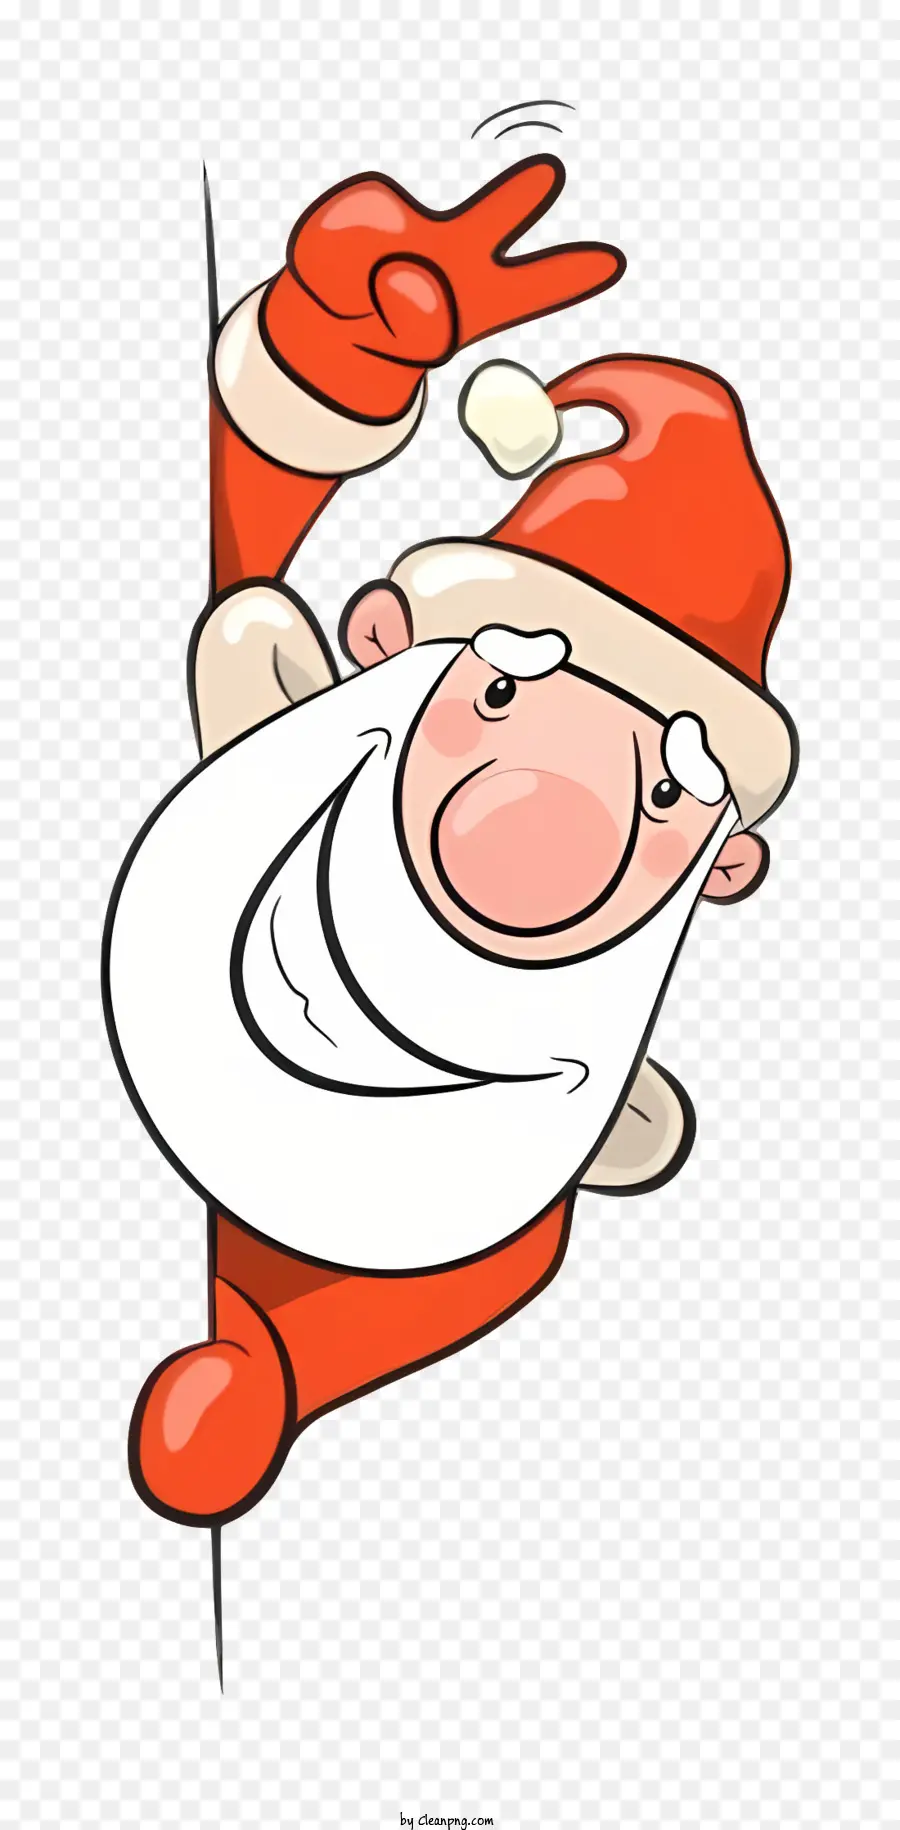 santa claus figure peace sign cartoon-like image black and white lines red and white santa suit